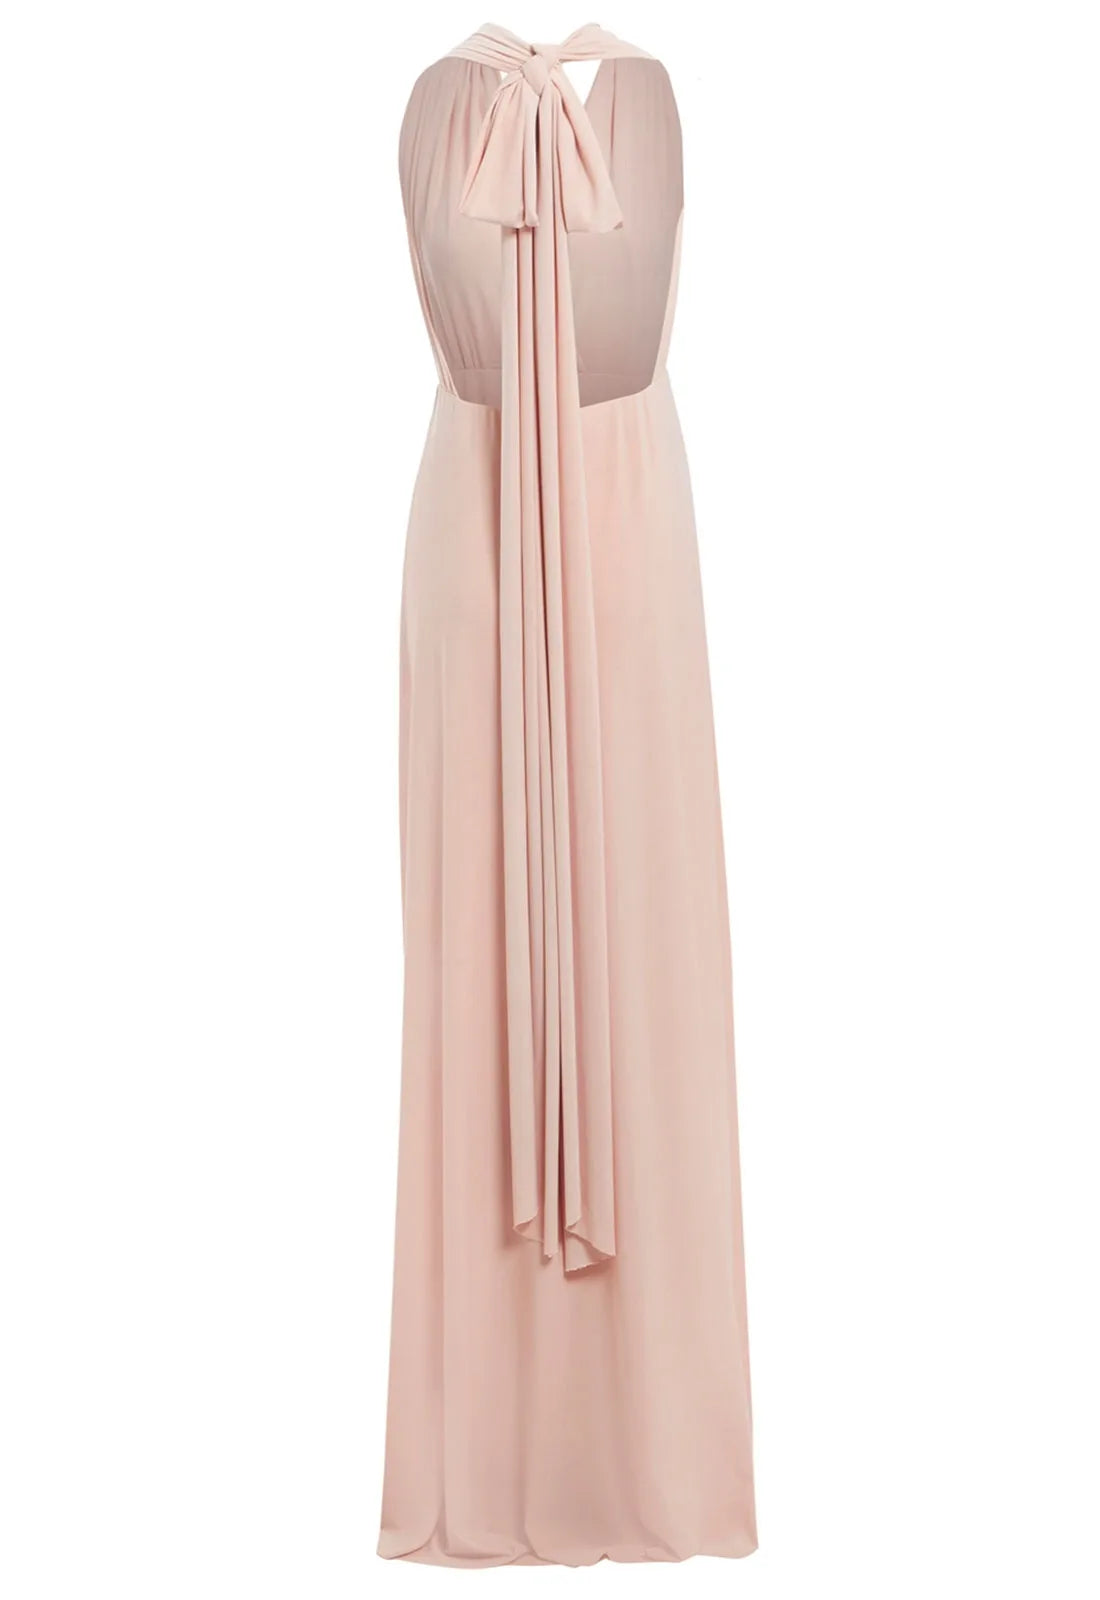 Revie Alexis Multiway Maxi Dress in Nude-13534